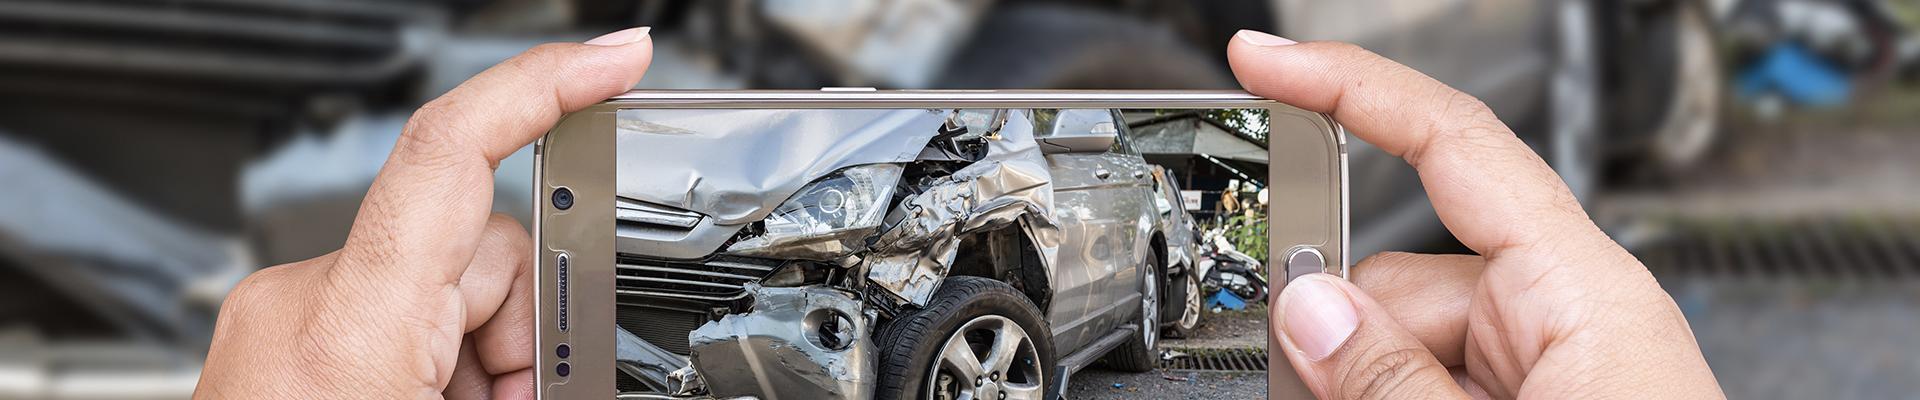 man taking picture of accident with smartphone